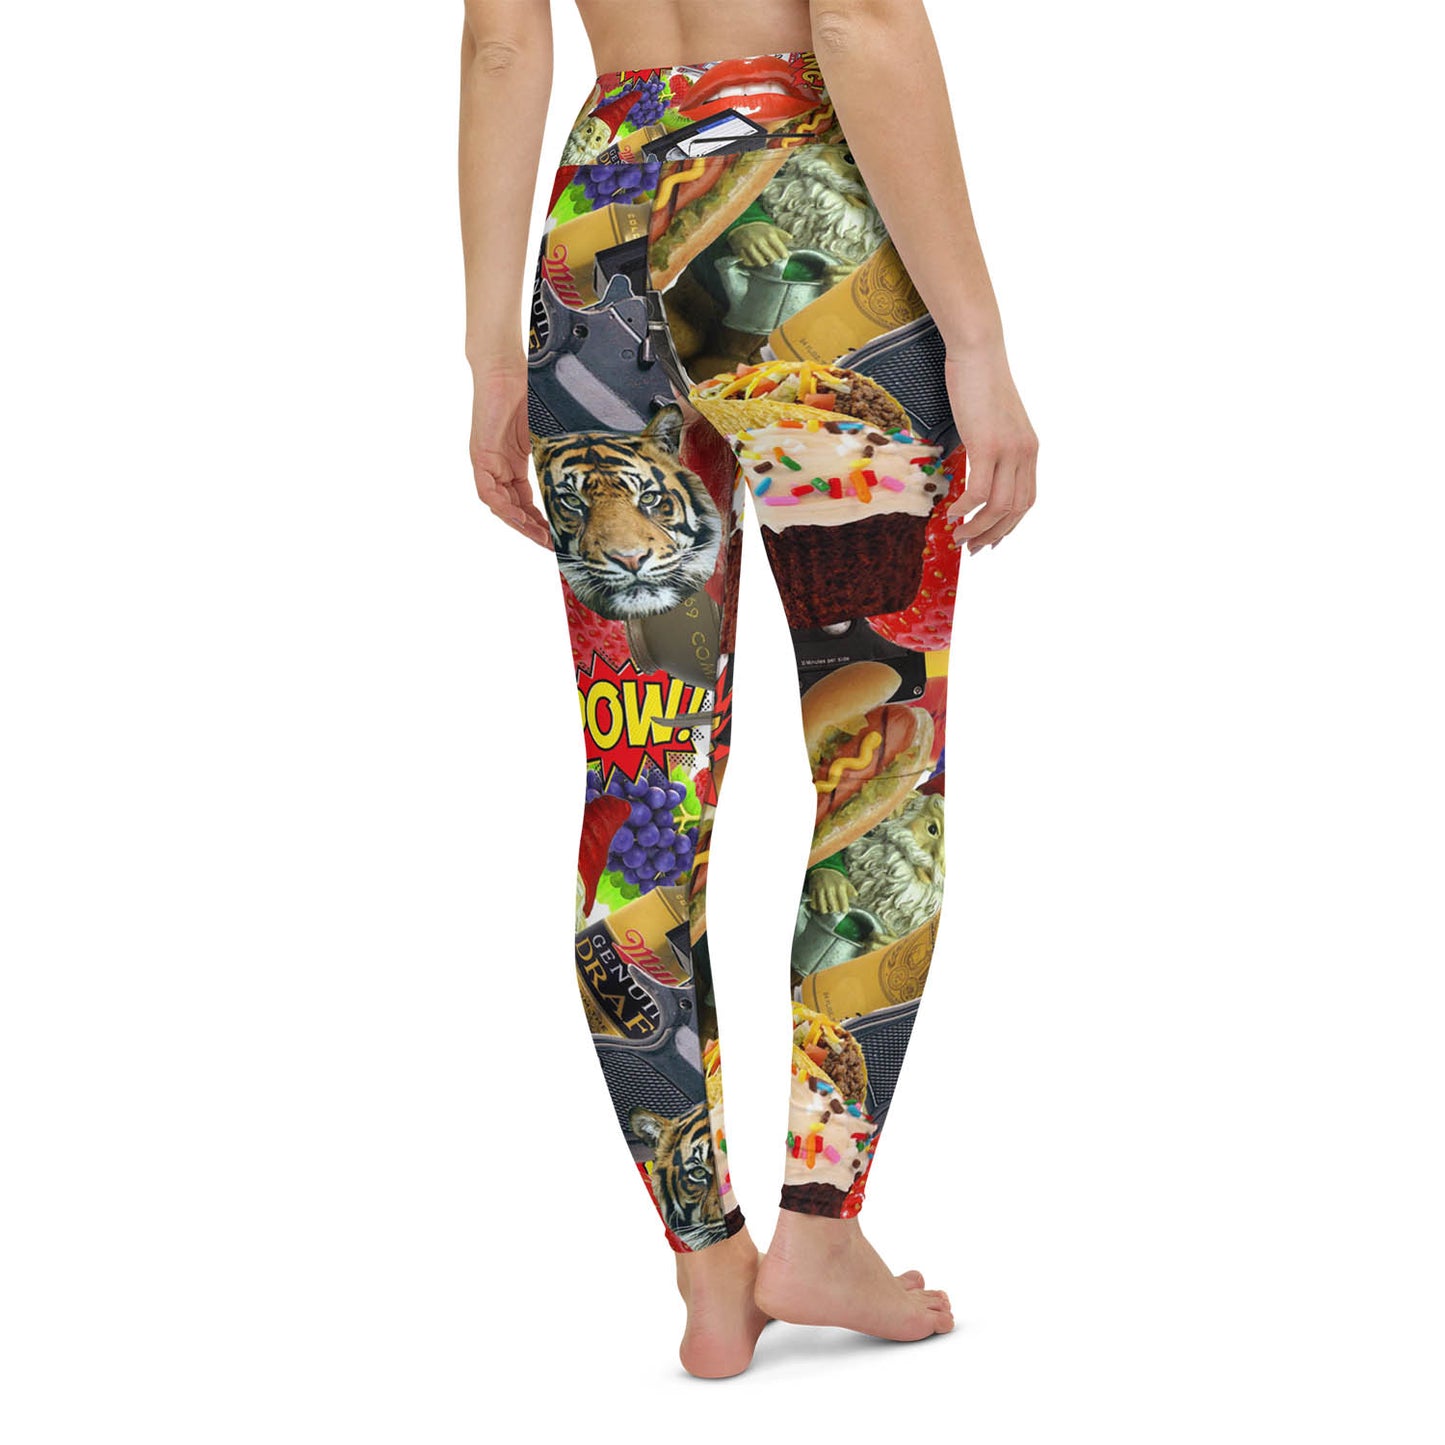 Hotdogs Grenades and Tigers Oh My High Waisted Workout Leggings